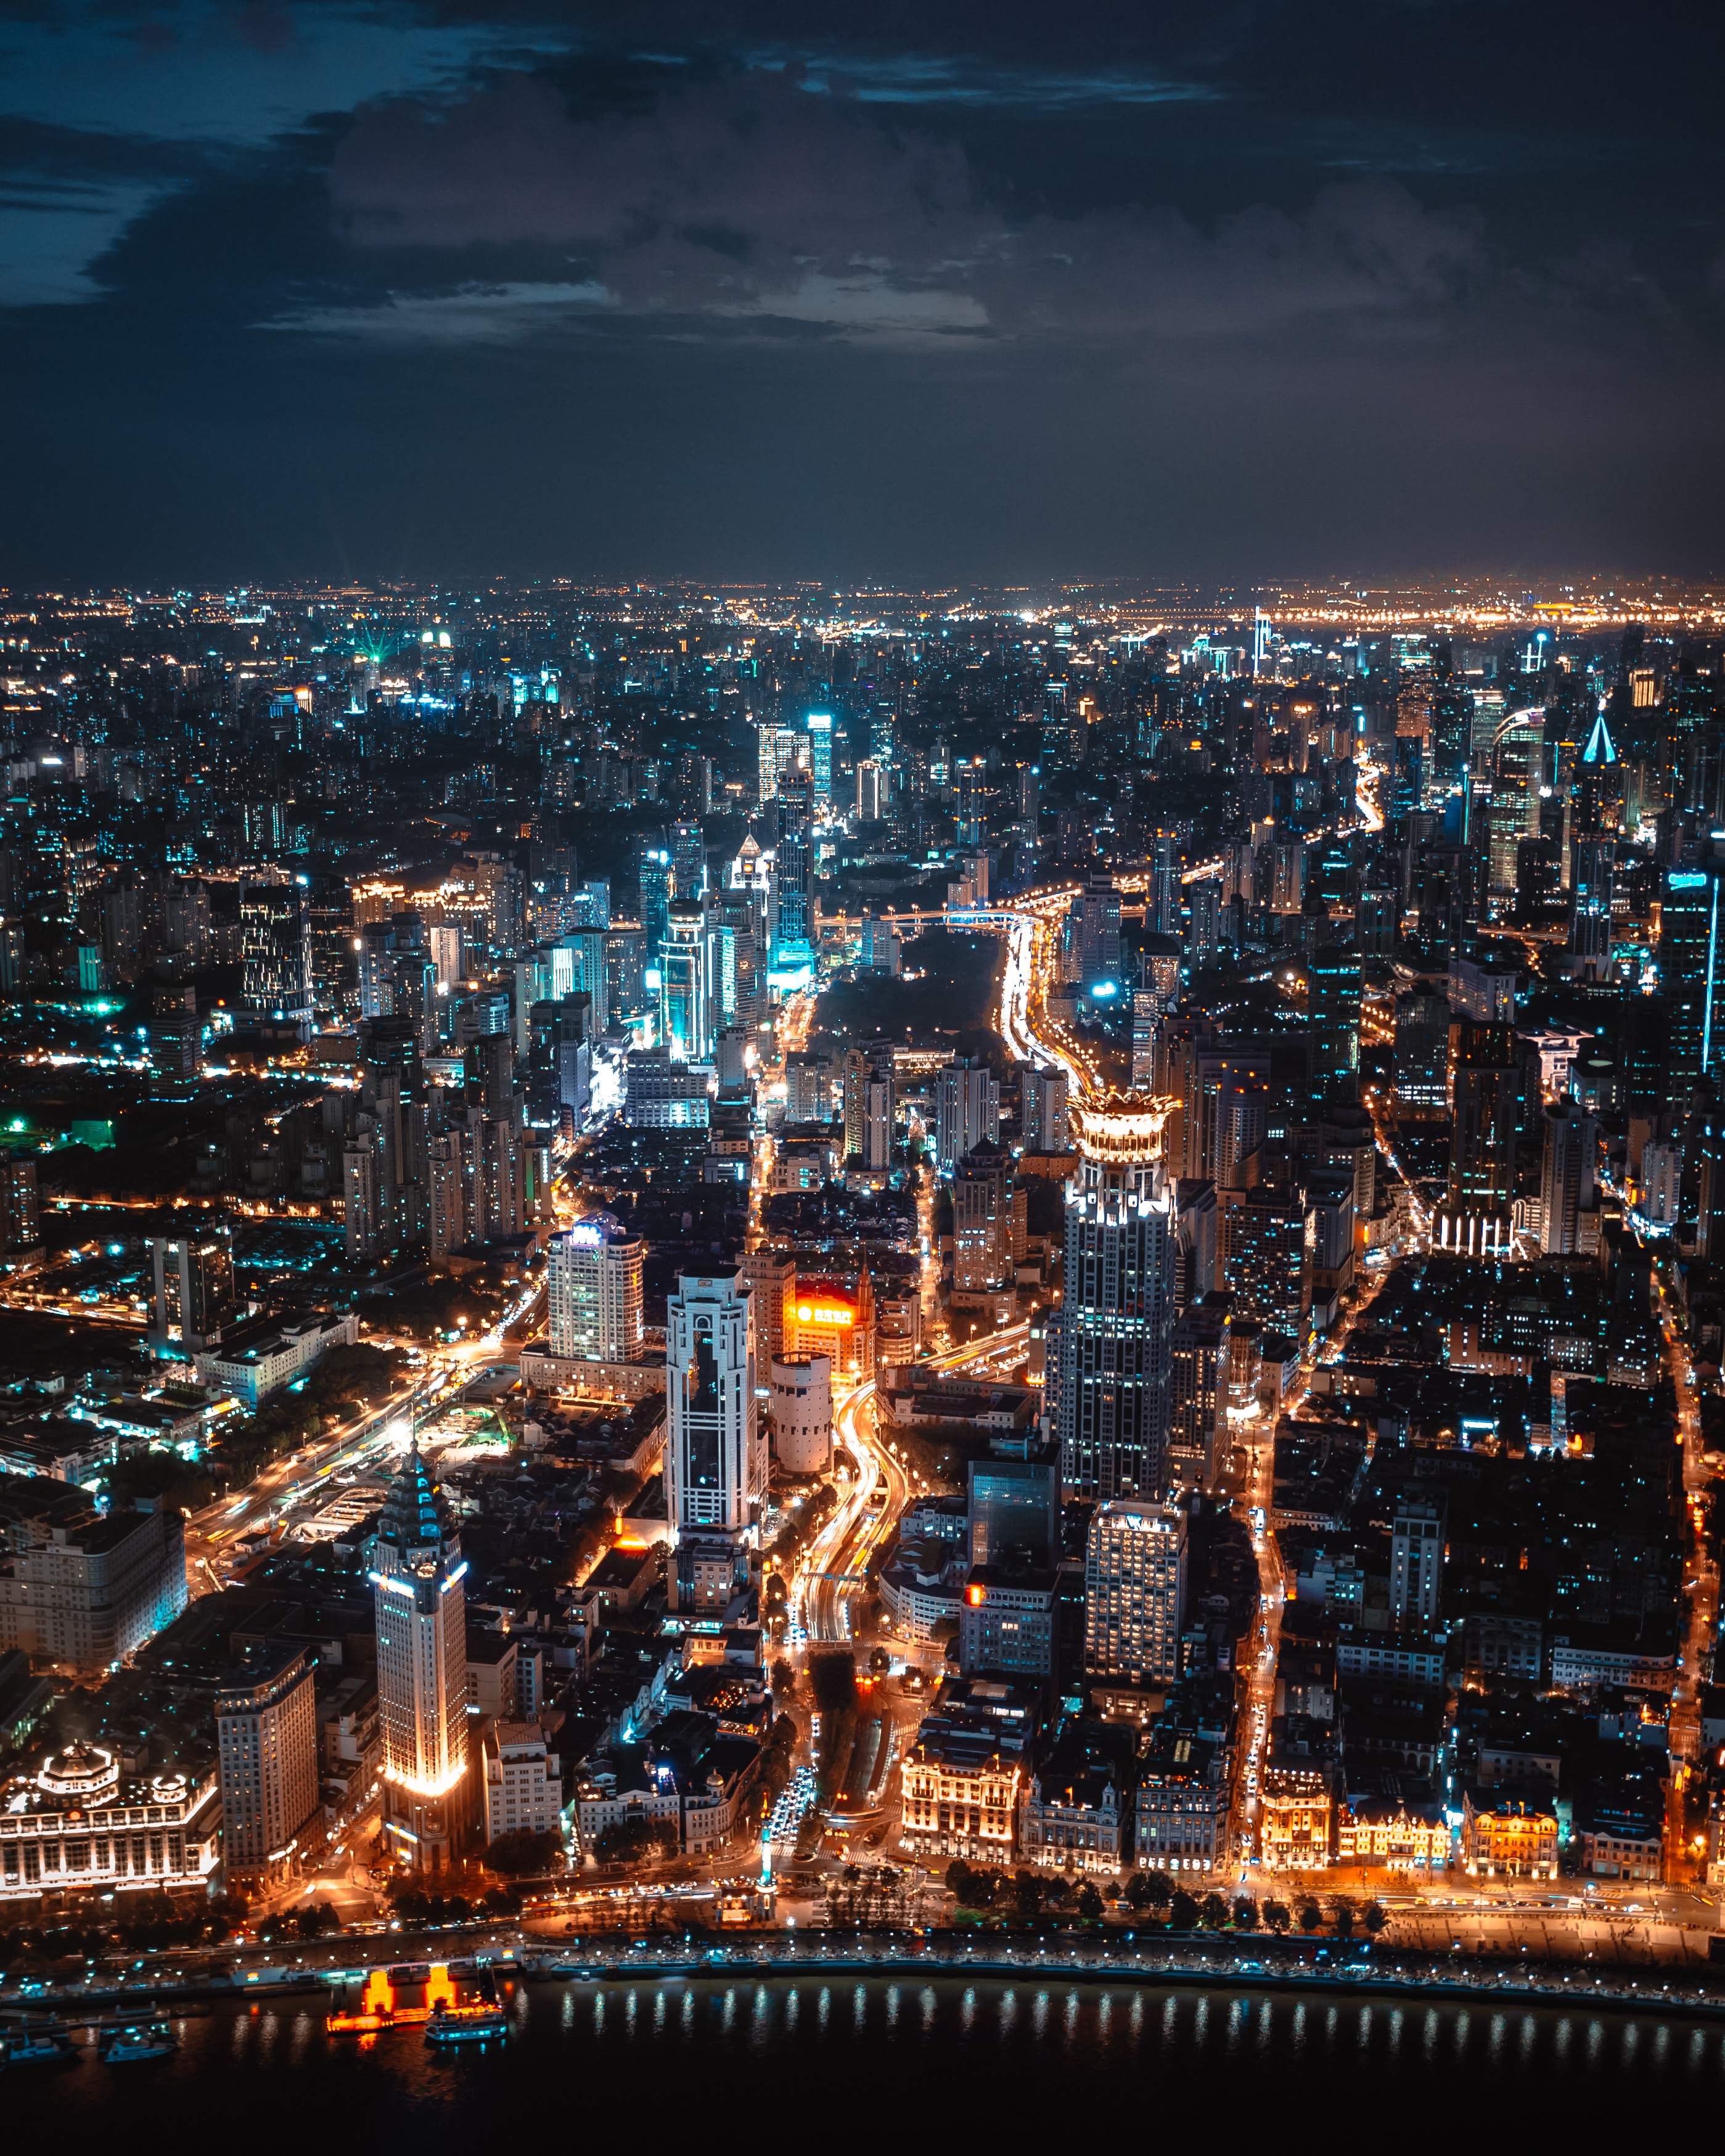 view from above, night city, skyscrapers, cities Full HD